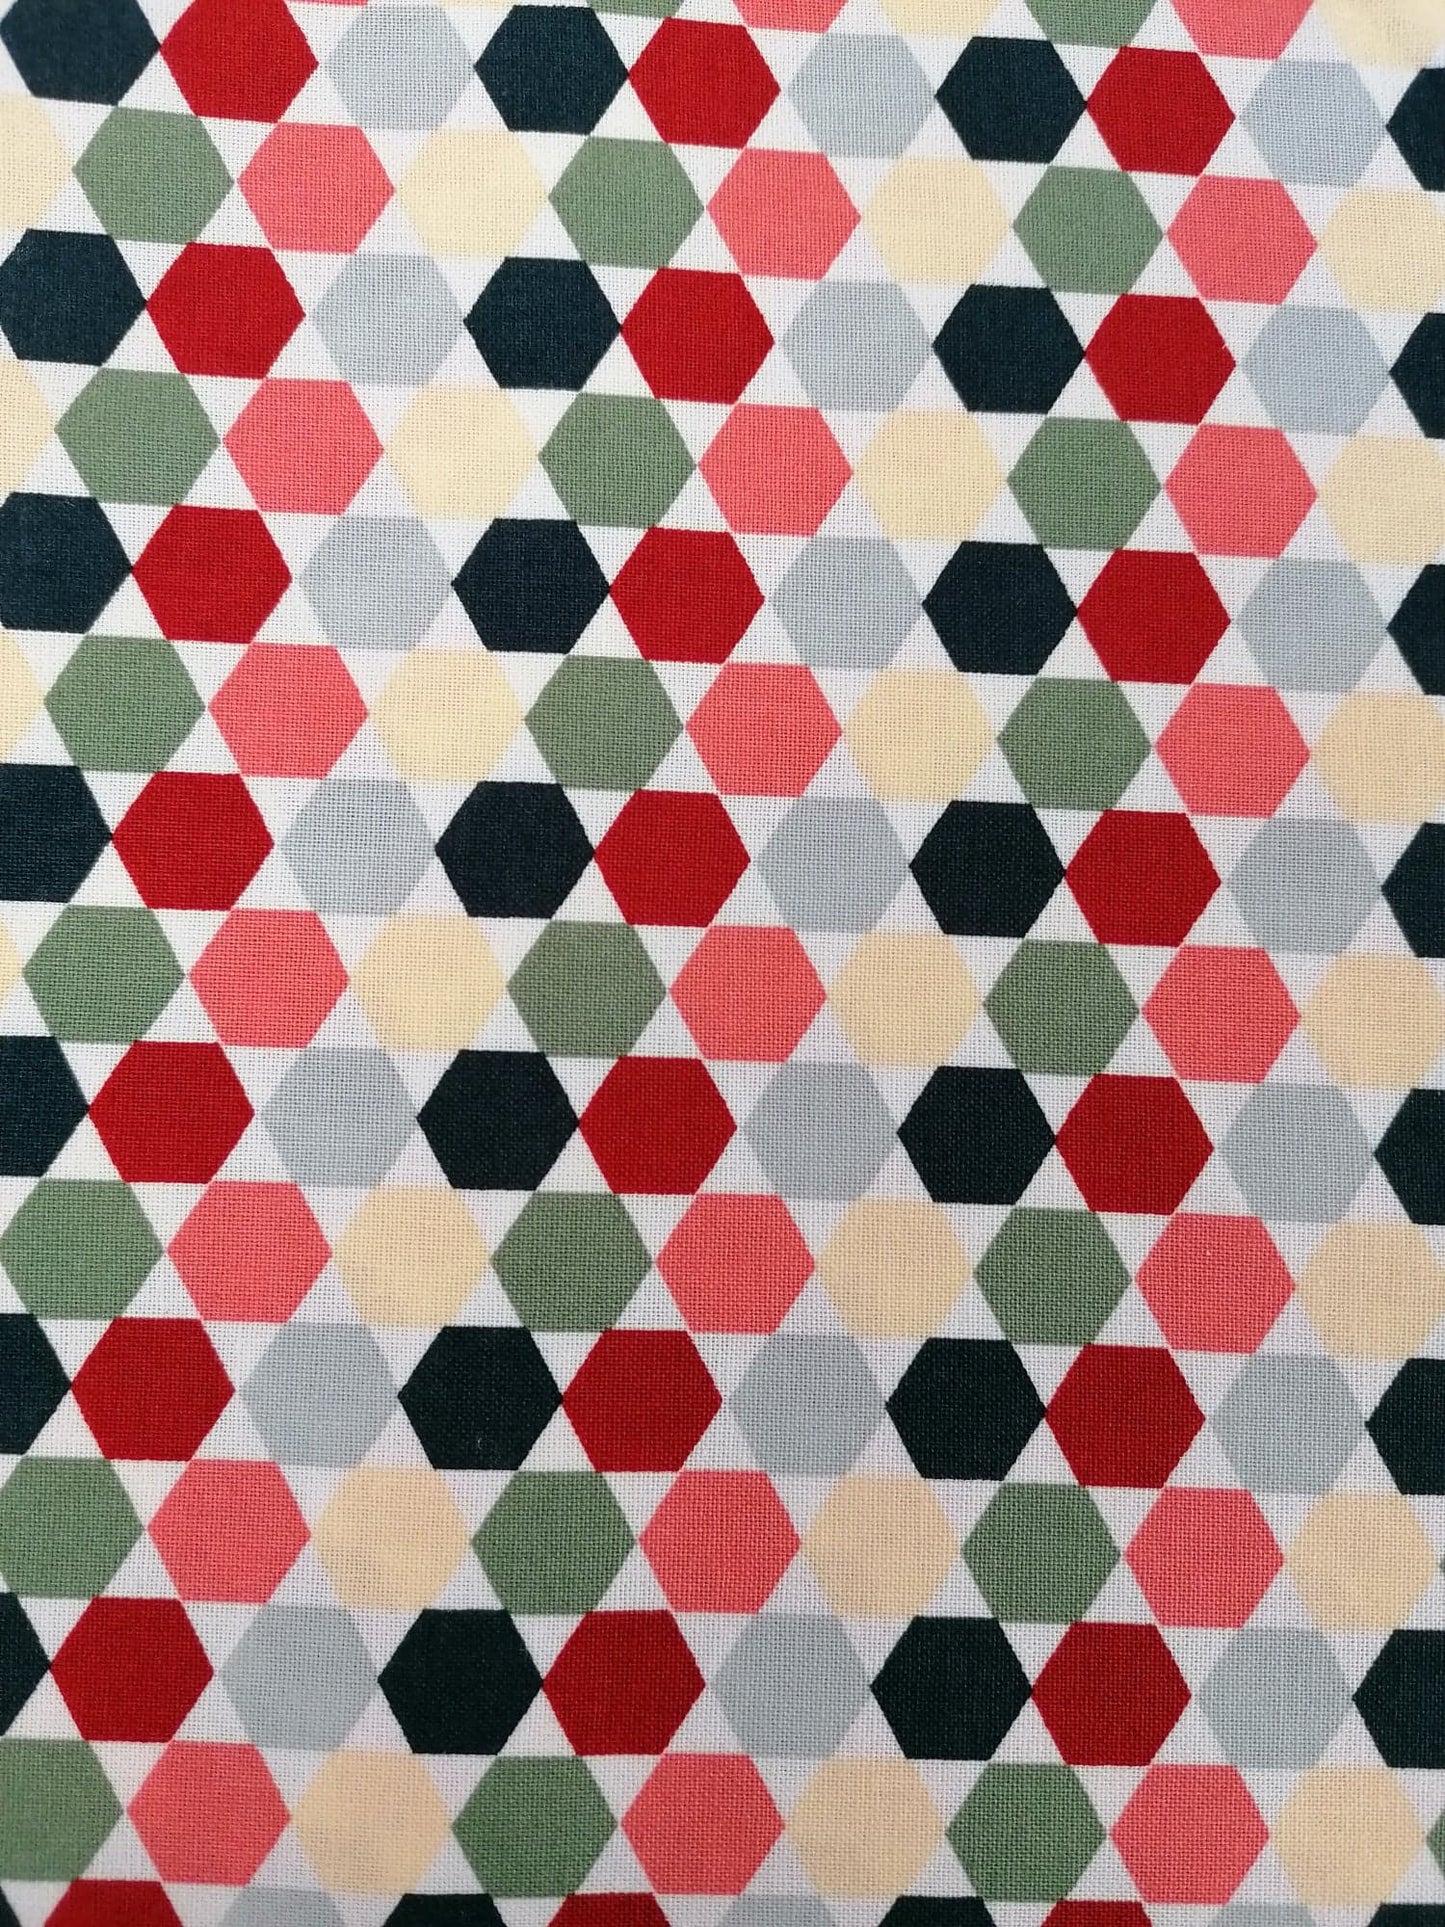 100% Cotton - Crafting & Quilting - Hexagons - Grey/Red/Peach/Cream - 44" Wide - Sold By the Metre